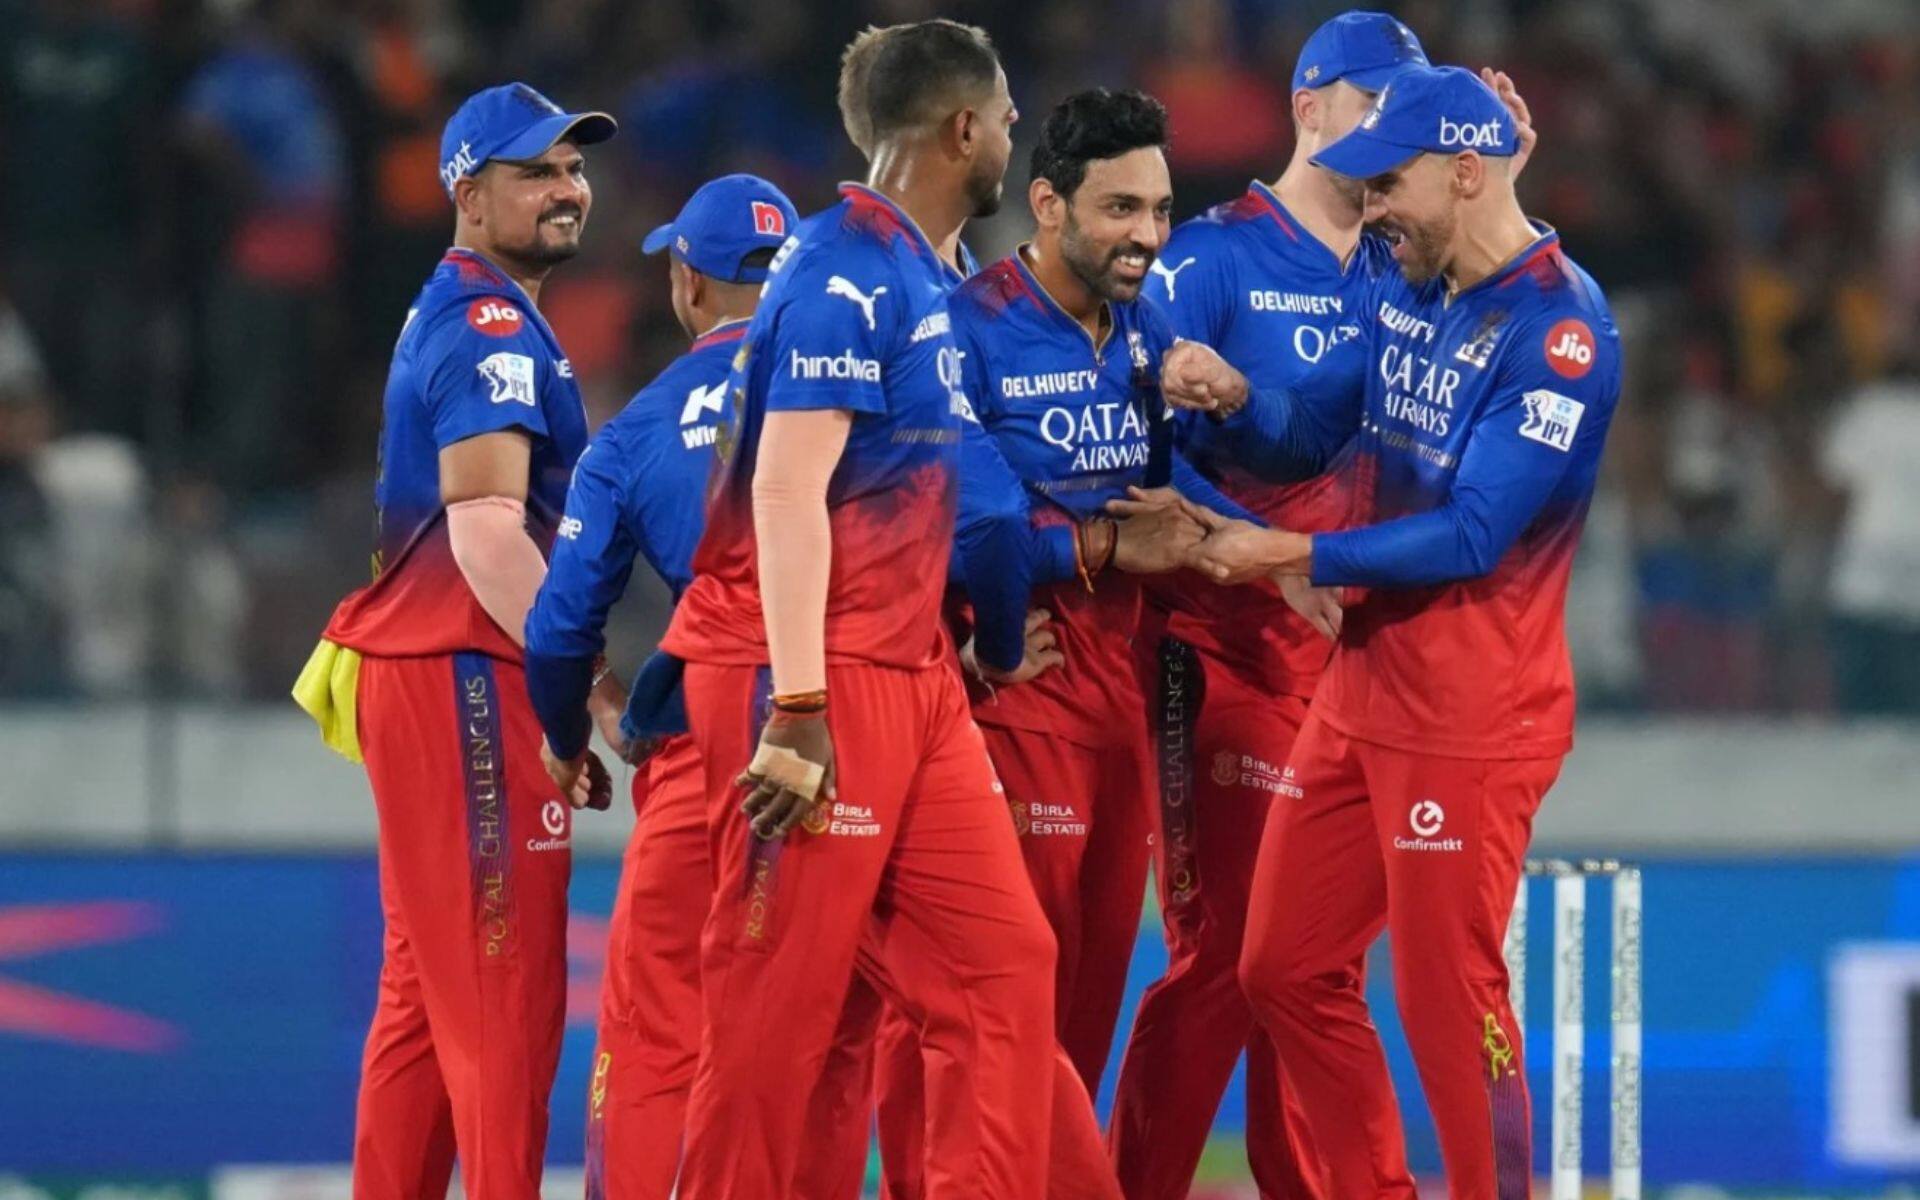 Faf du Plessis celebrating a wicket with RCB teammates (BCCI)